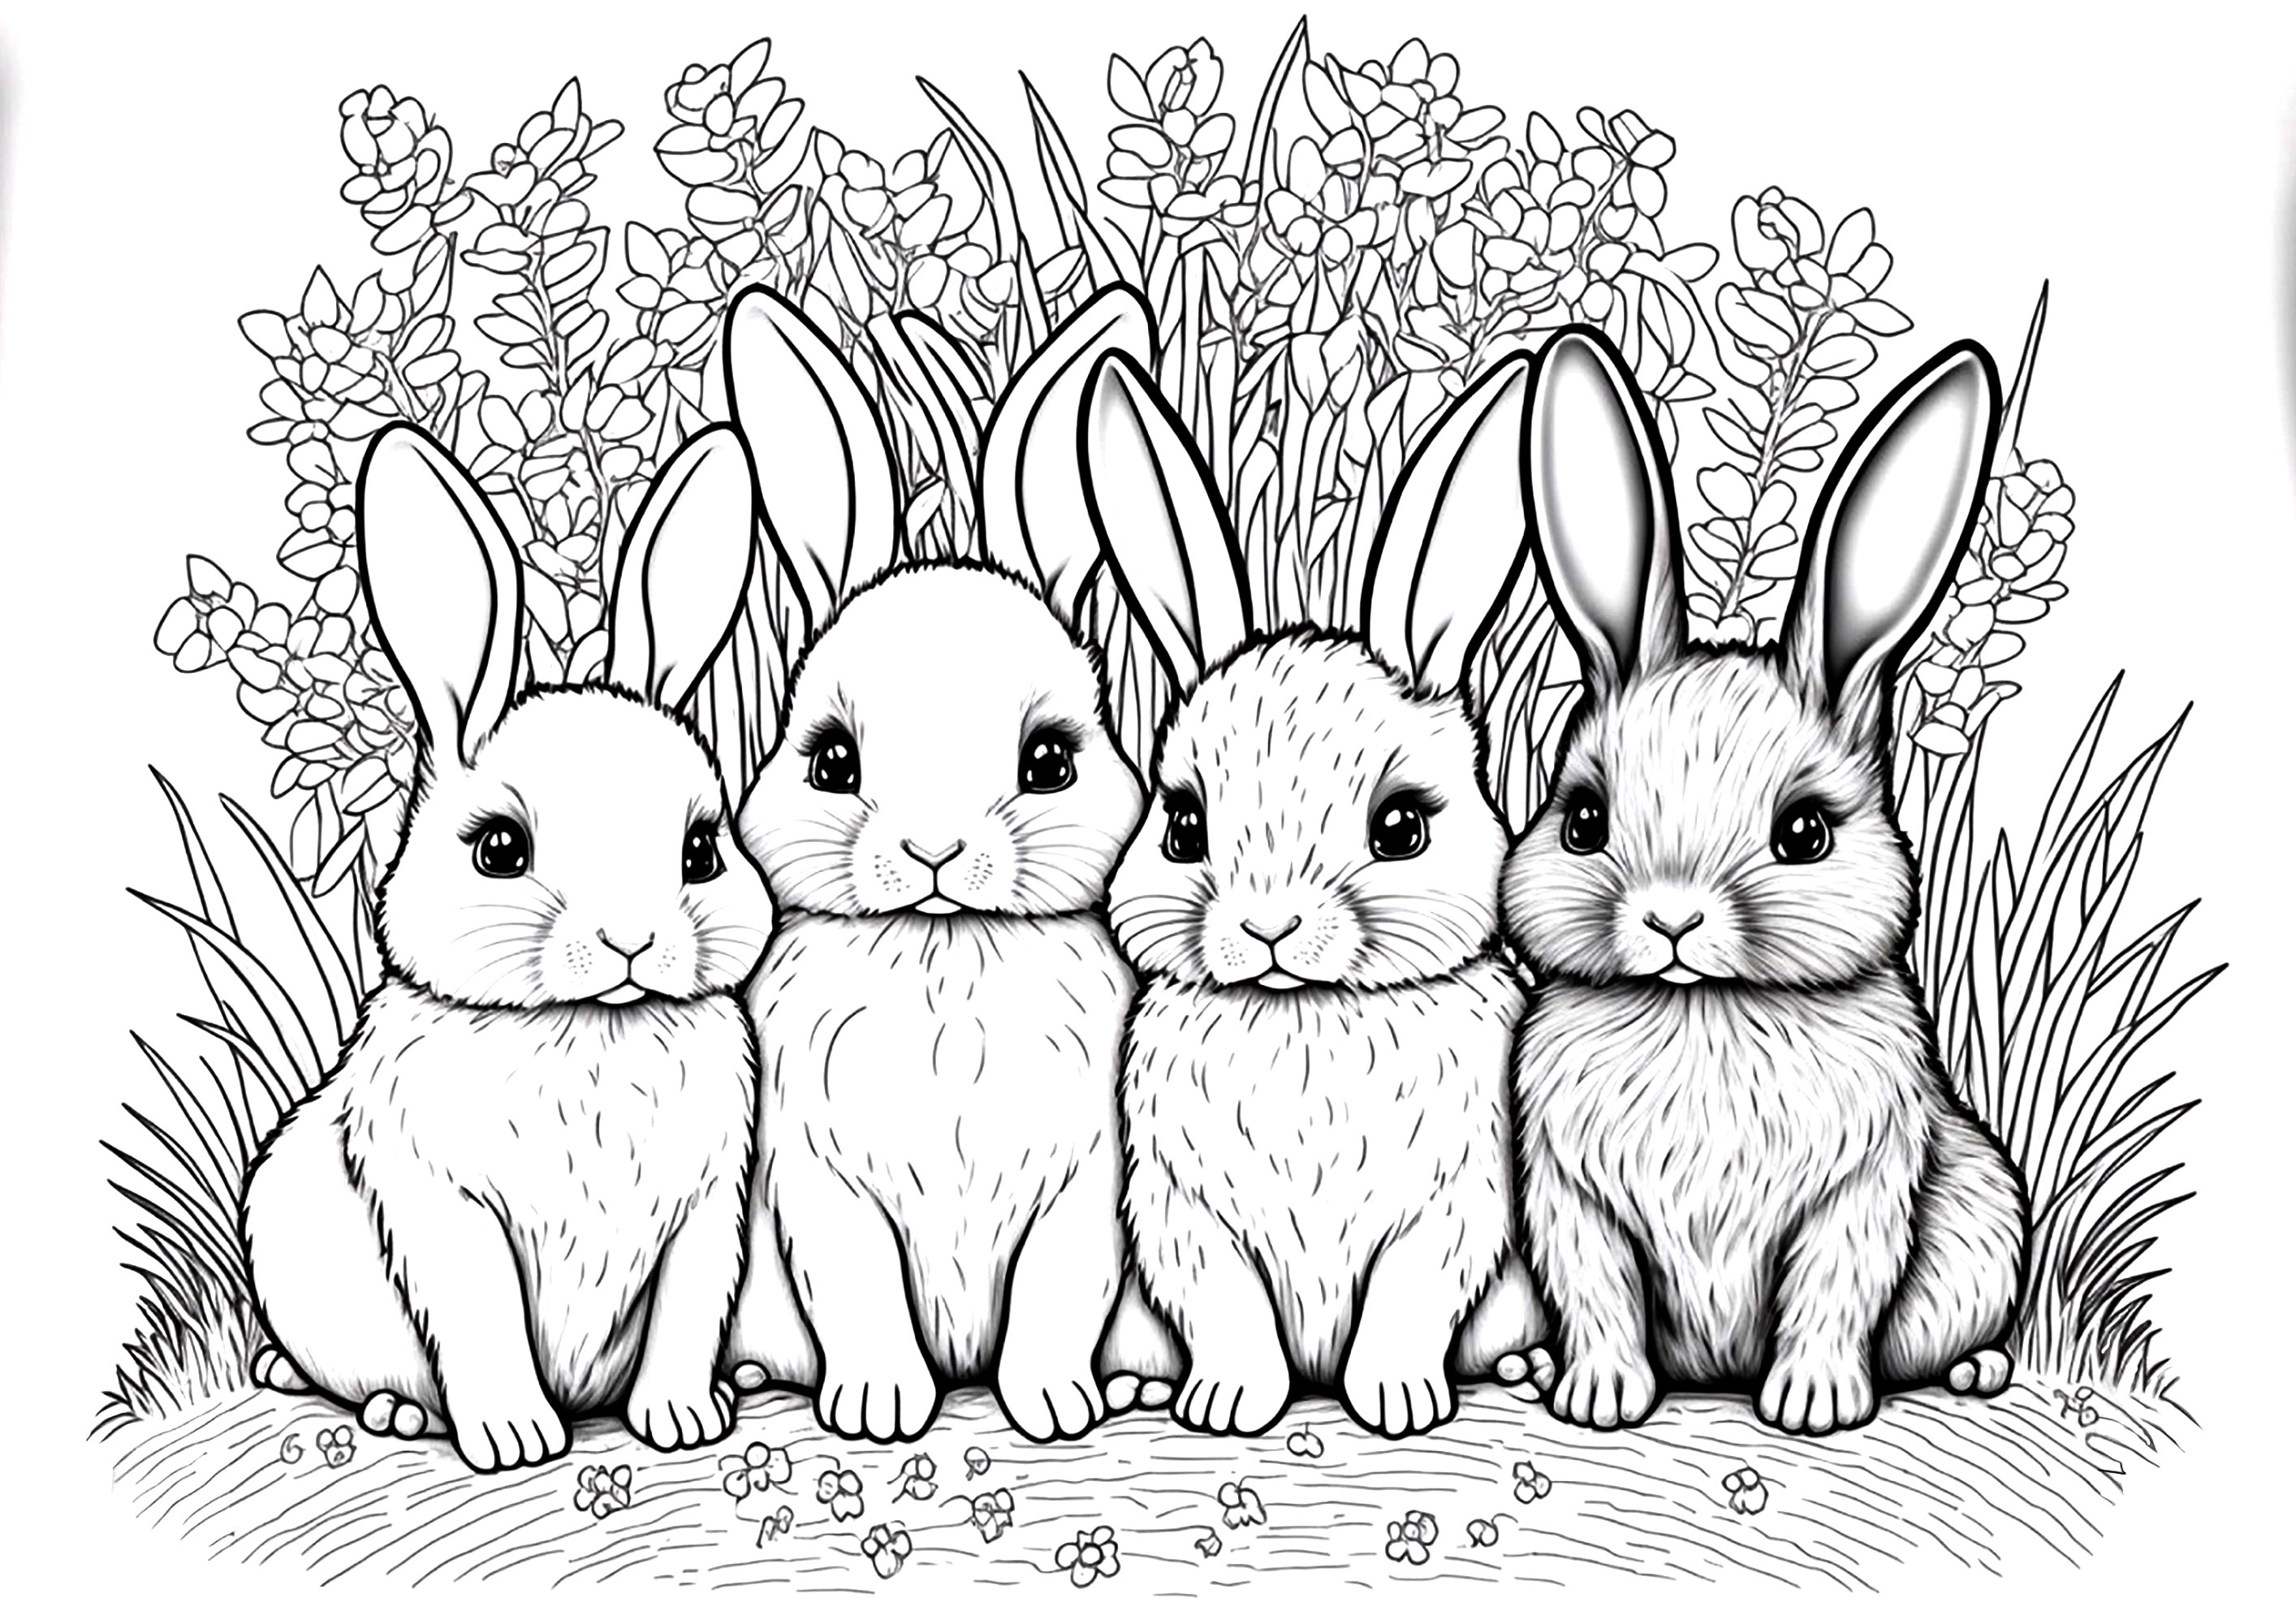 Four cute little bunnies, and a plant background